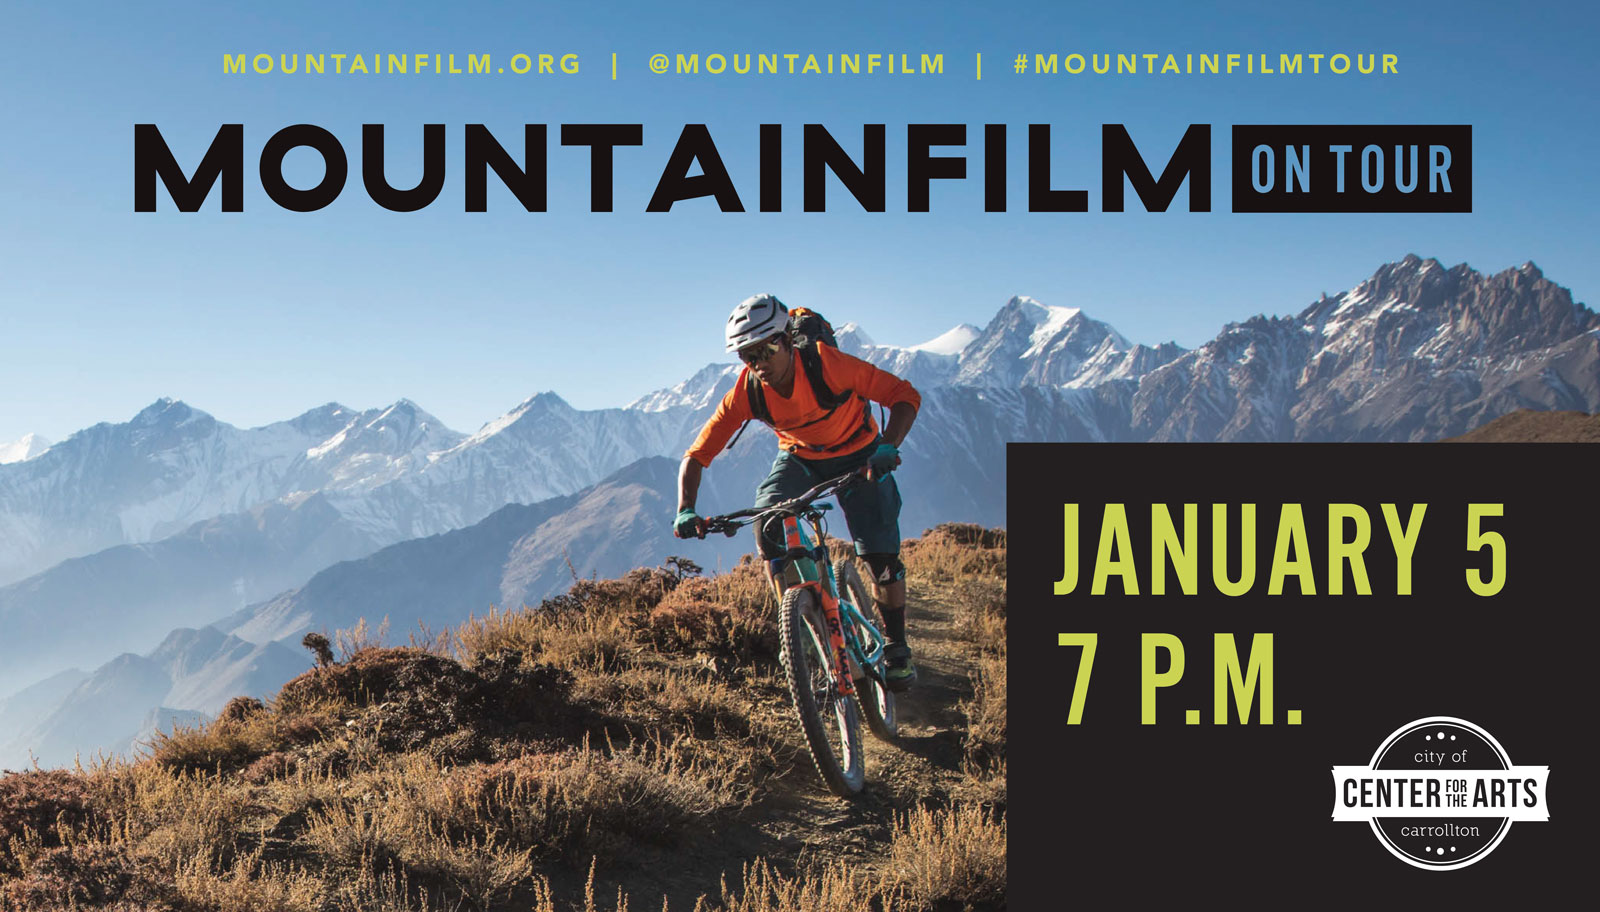 Mountainfilm on tour to arrive at the Carrollton Center for the Arts